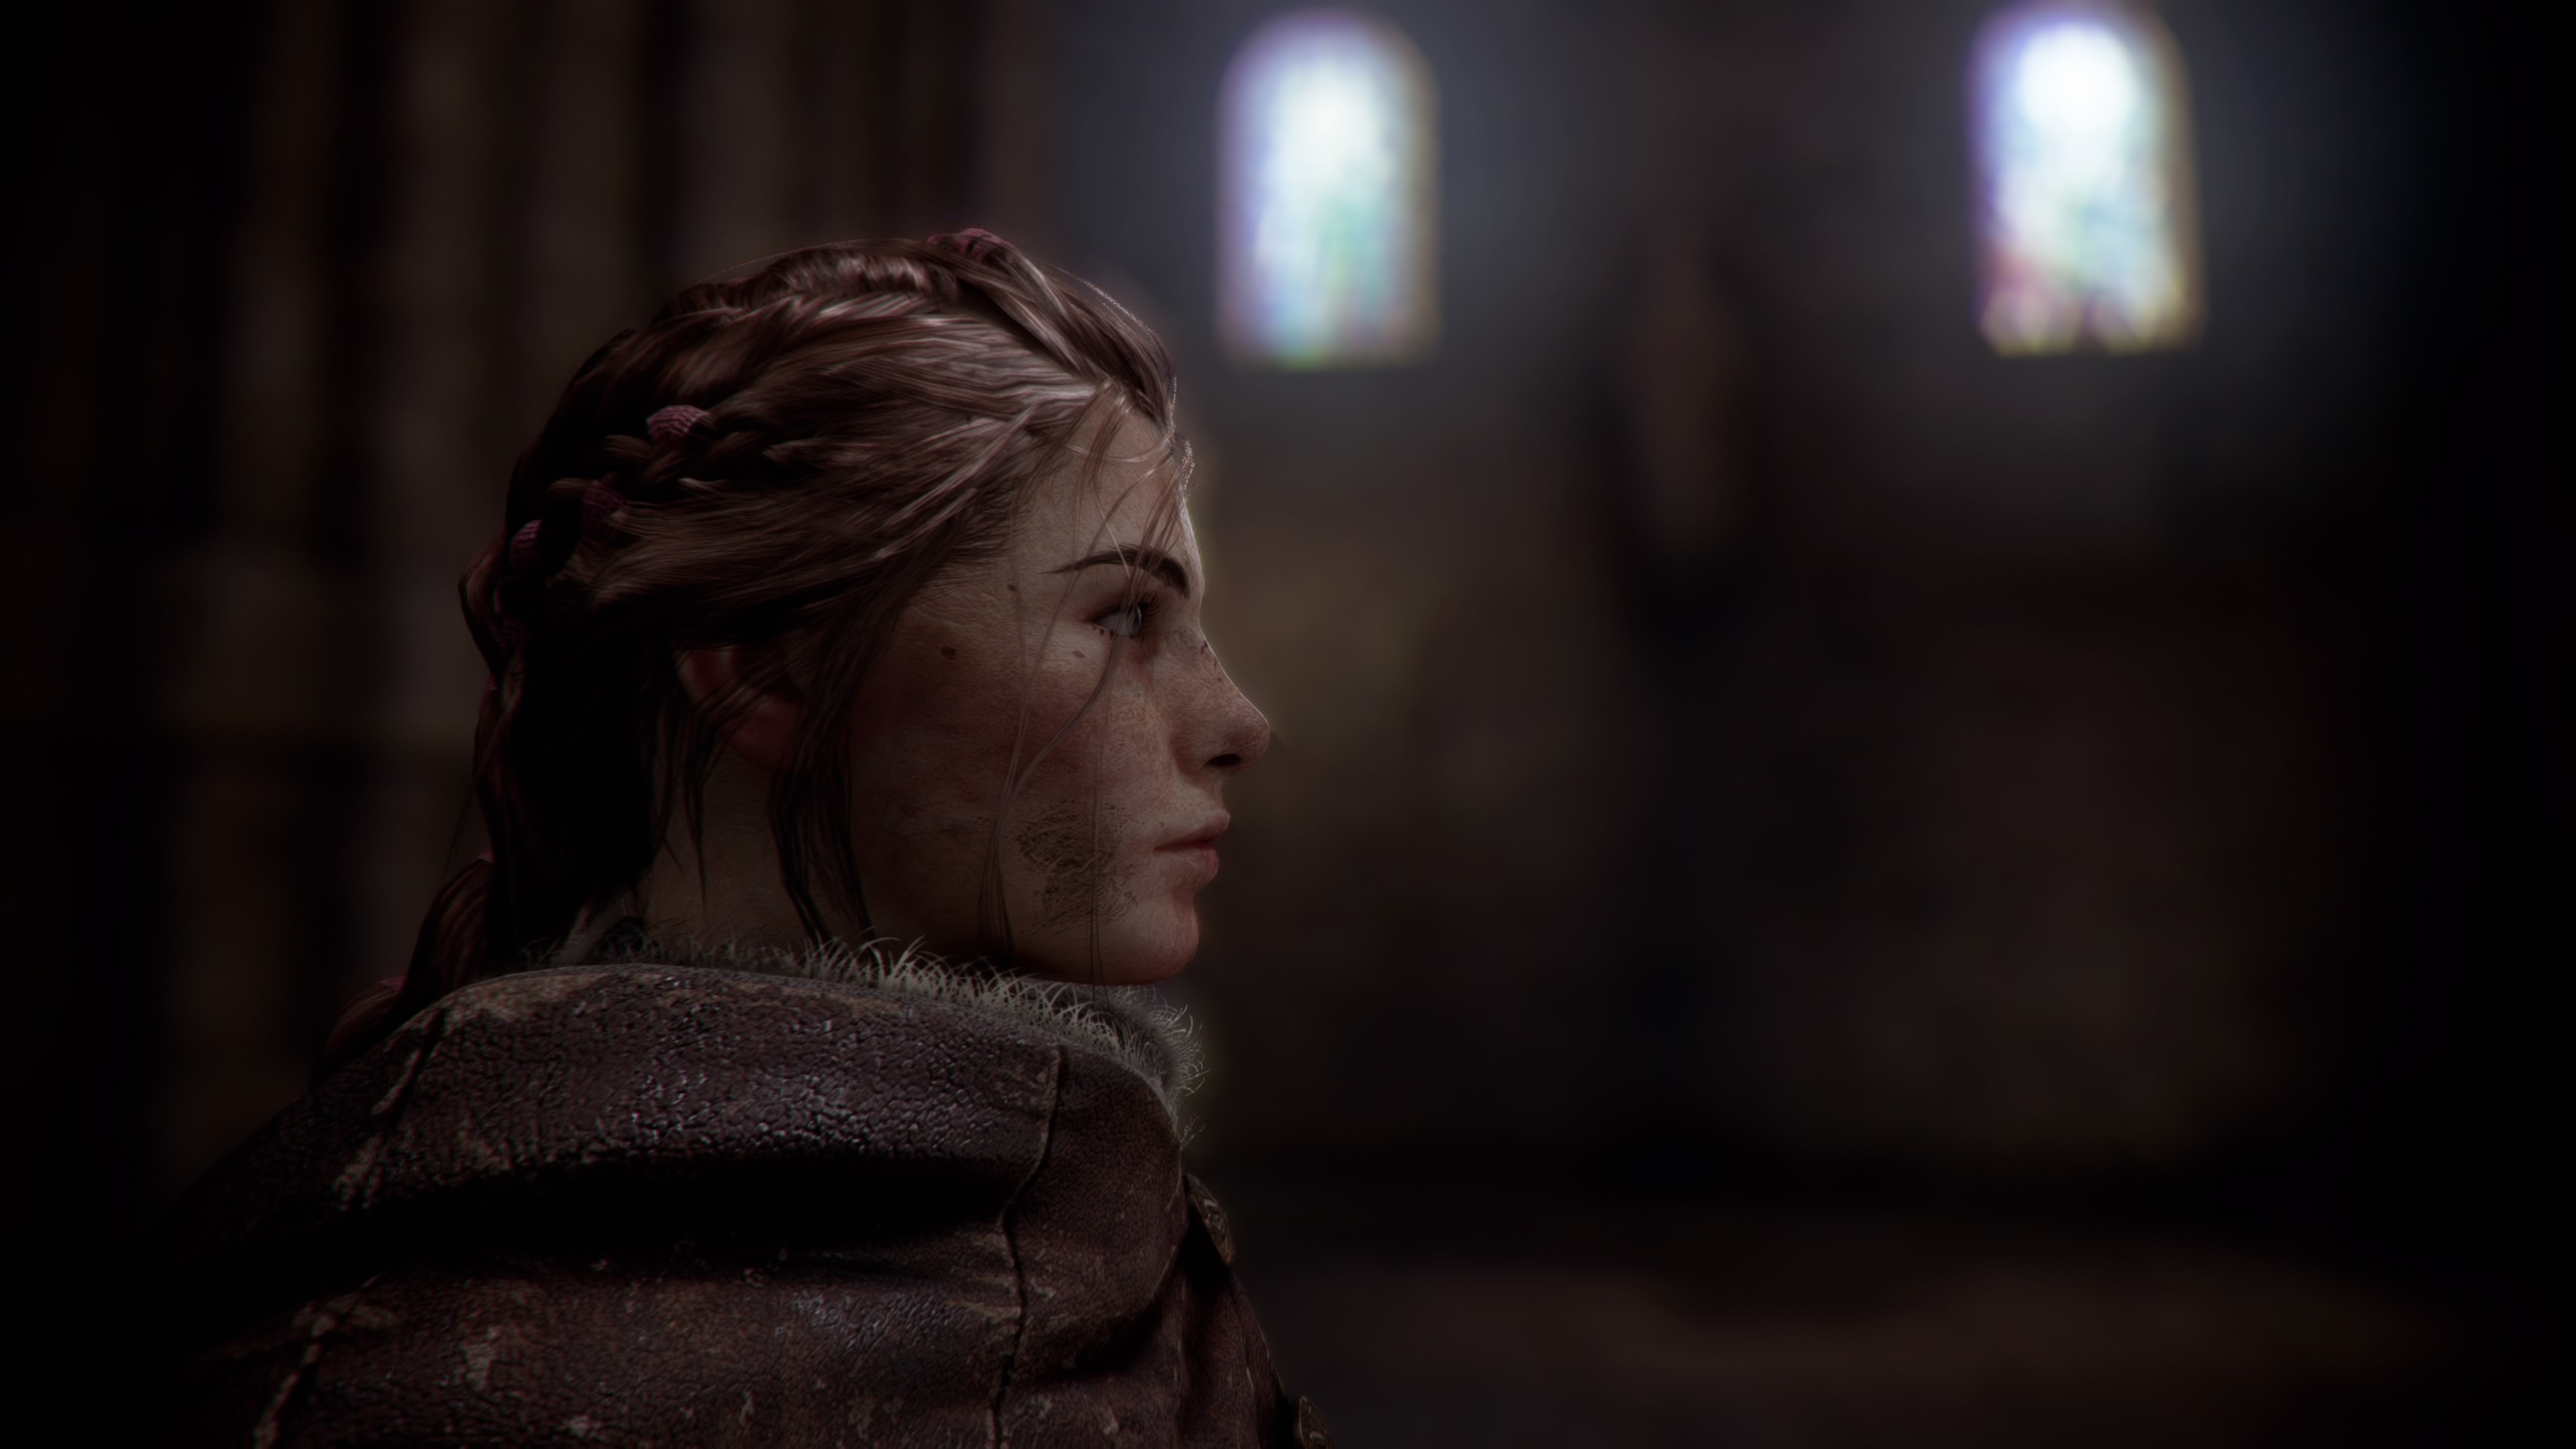 A Plague Tale Innocence Amicia PlayStation 4 Playstation 5 England Video Games Video Game Characters 3840x2160